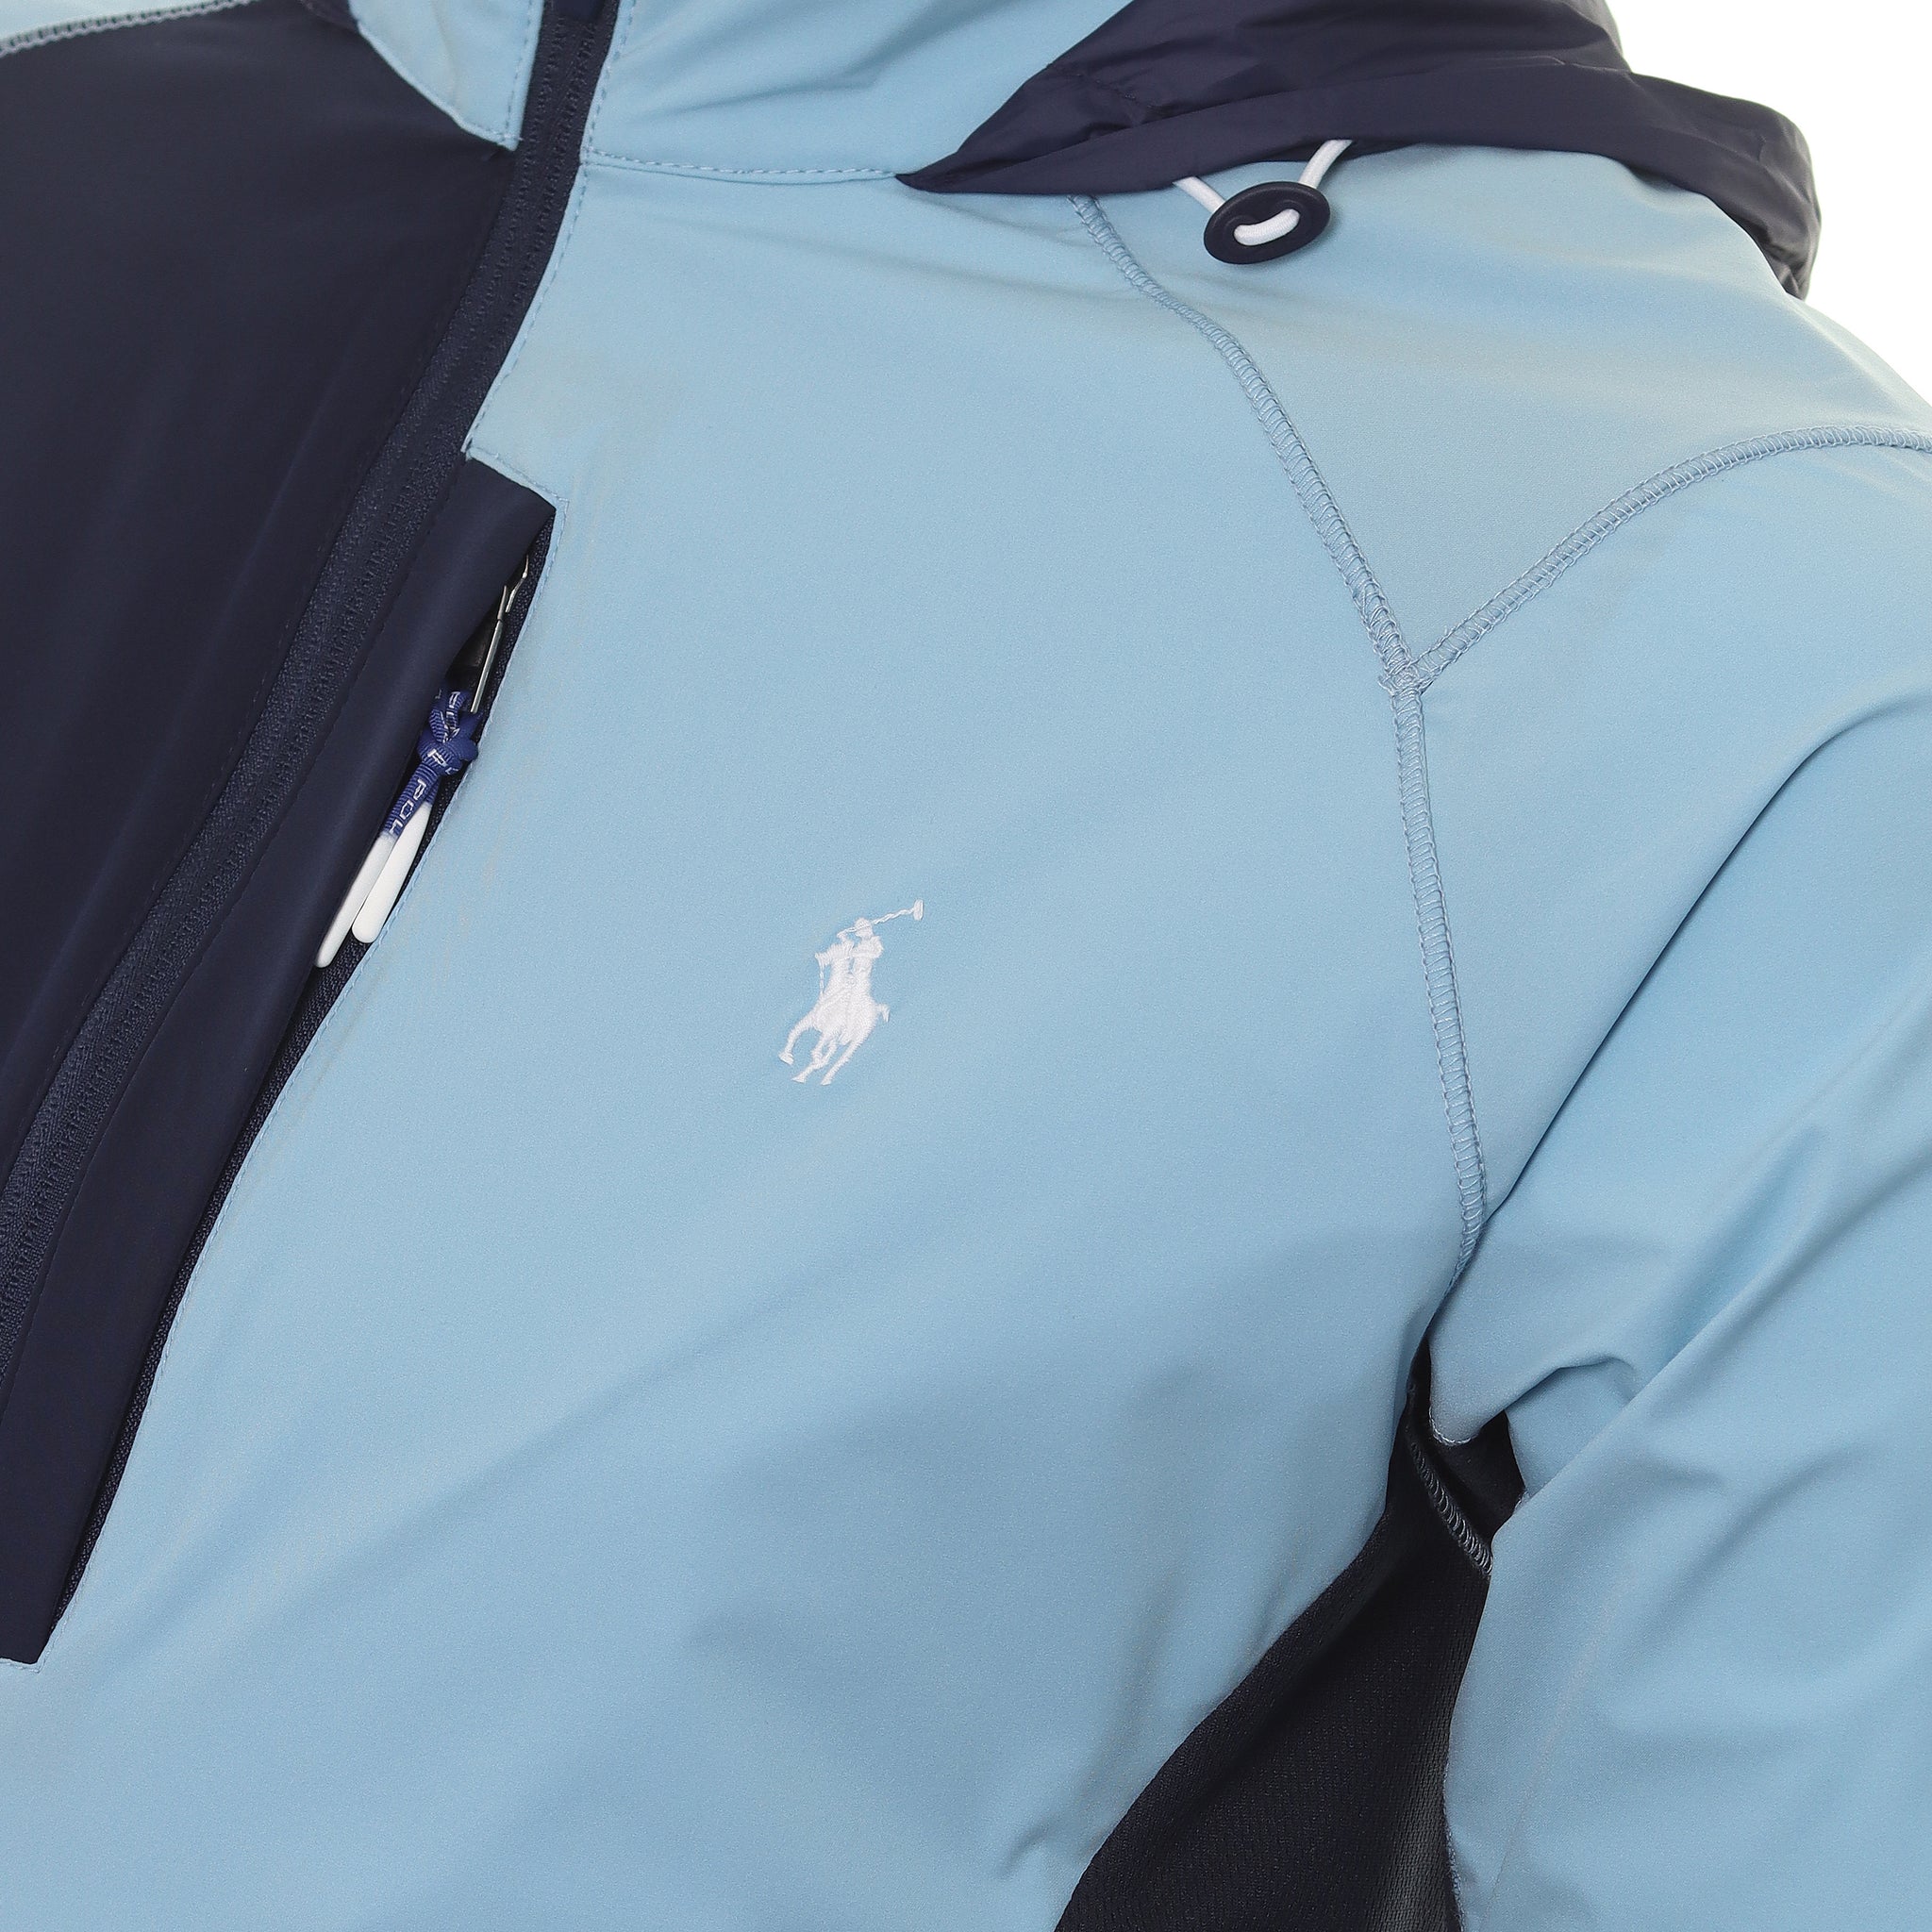 polo-golf-ralph-lauren-packable-hooded-jacket-710890718-powder-blue-french-navy-001